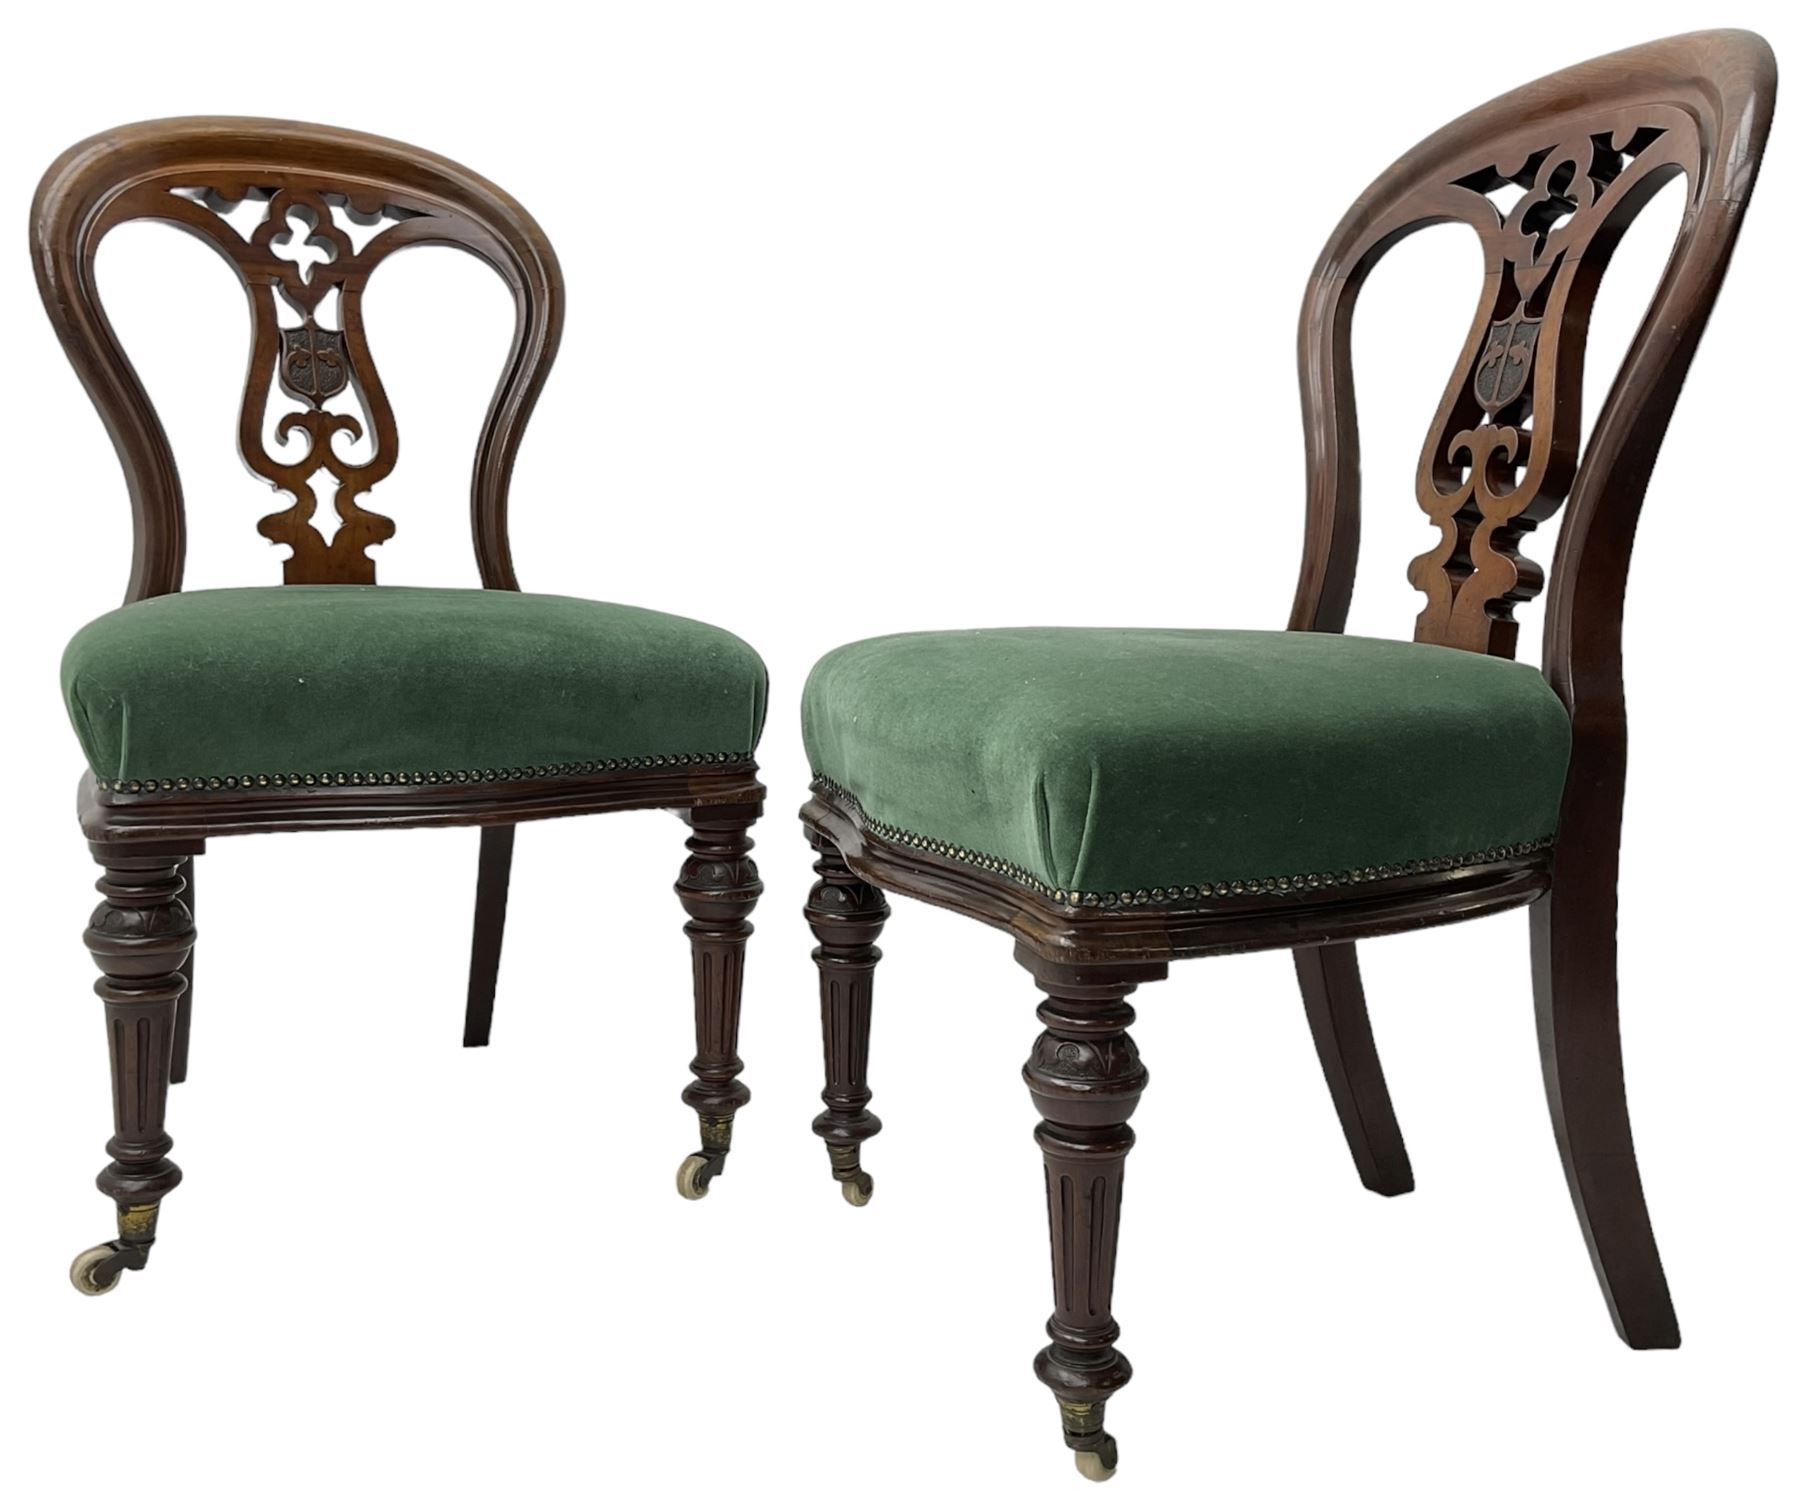 Pair of Victorian mahogany dining chairs - Image 5 of 6